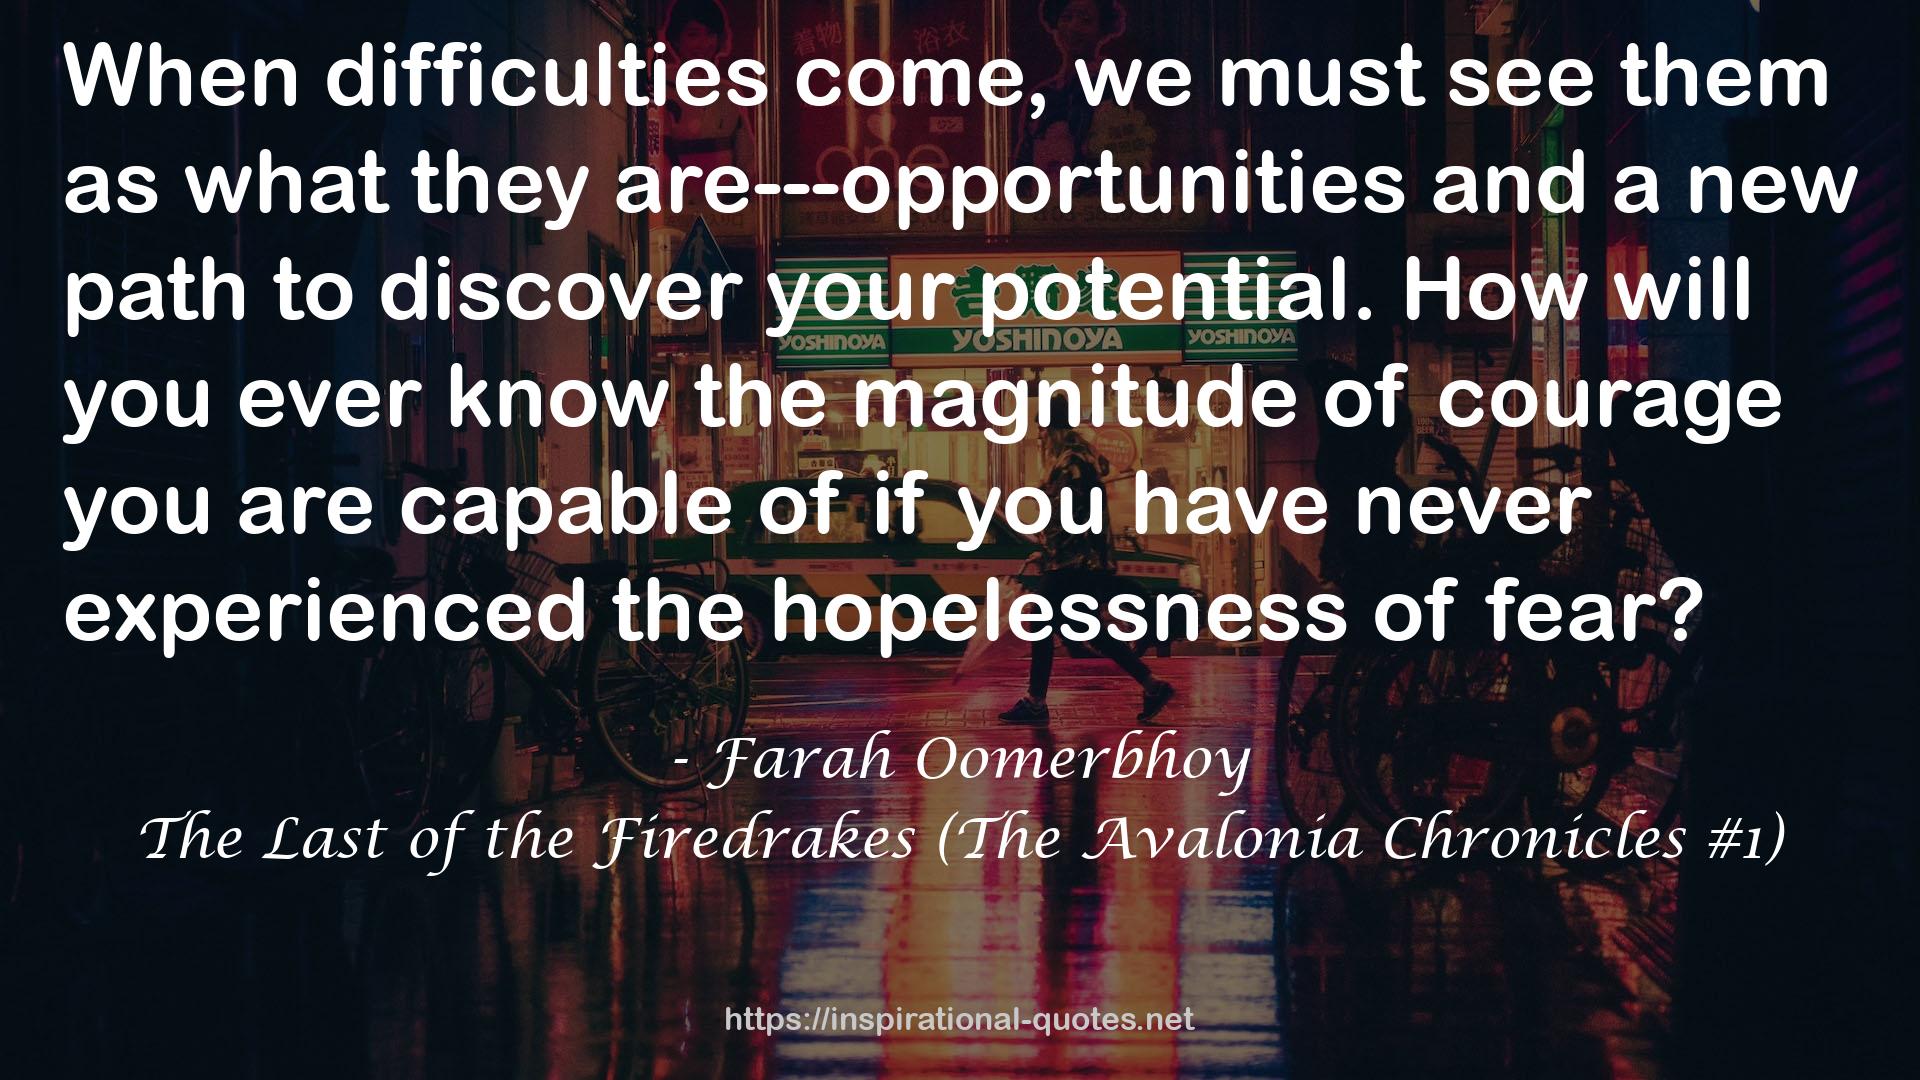 The Last of the Firedrakes (The Avalonia Chronicles #1) QUOTES